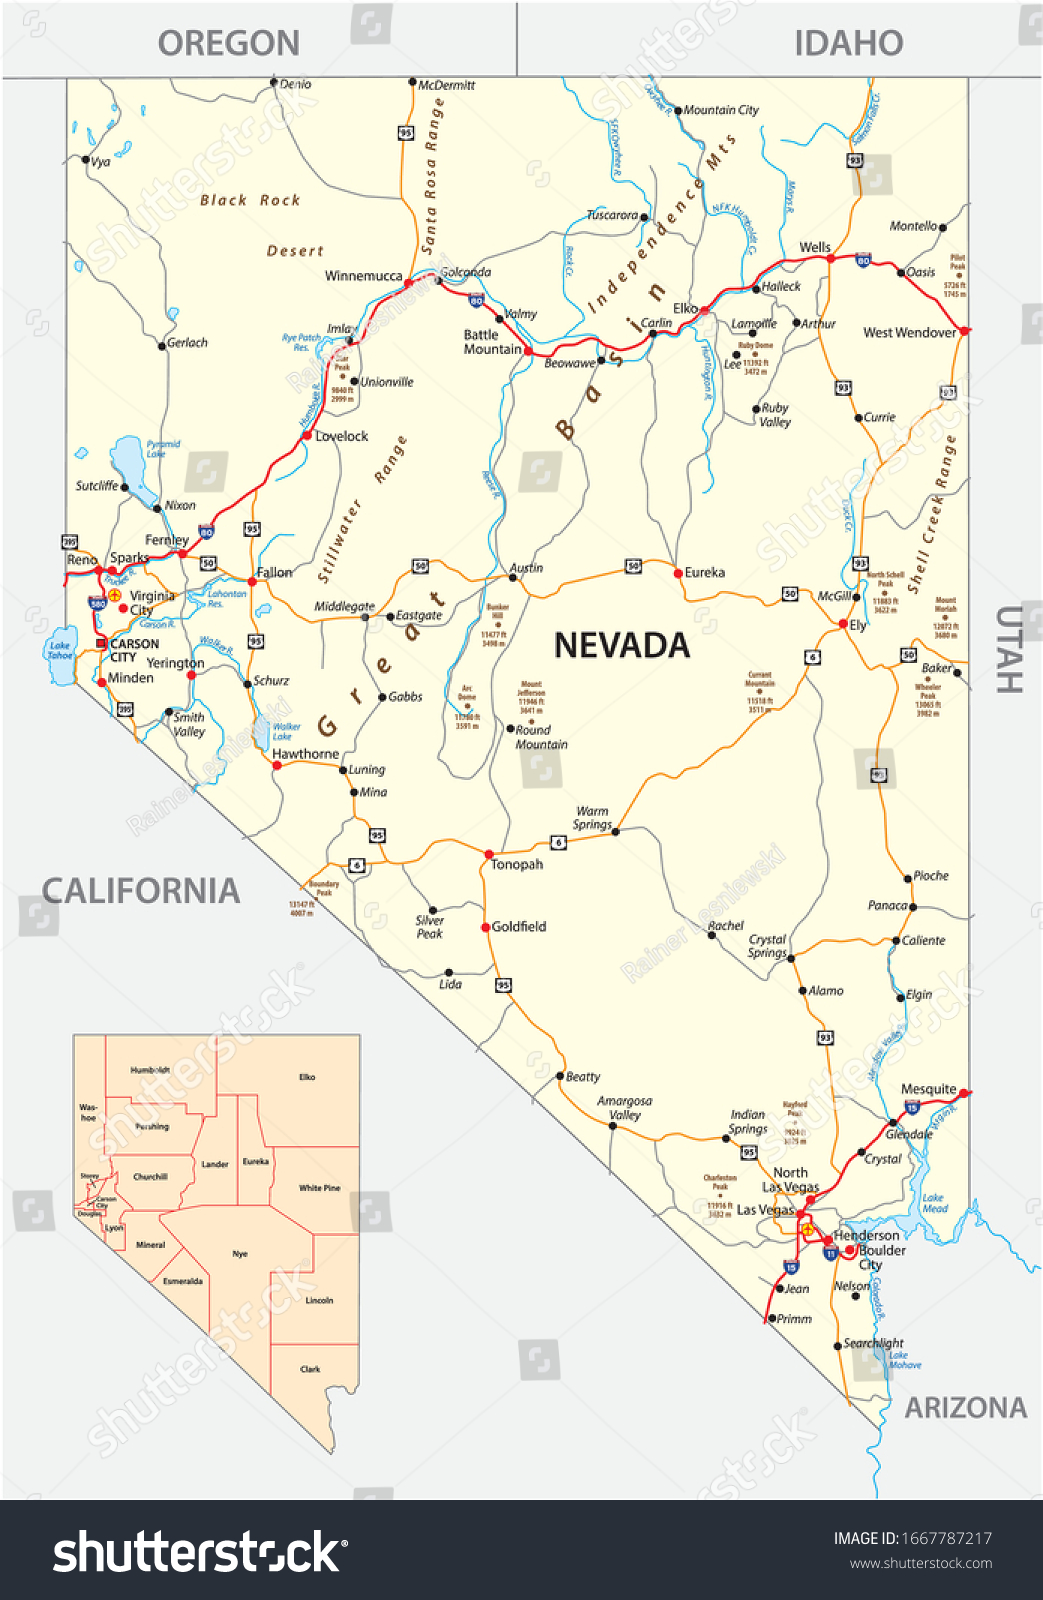 SVG of Nevada road and administrative map with interstate US highways and main roads svg